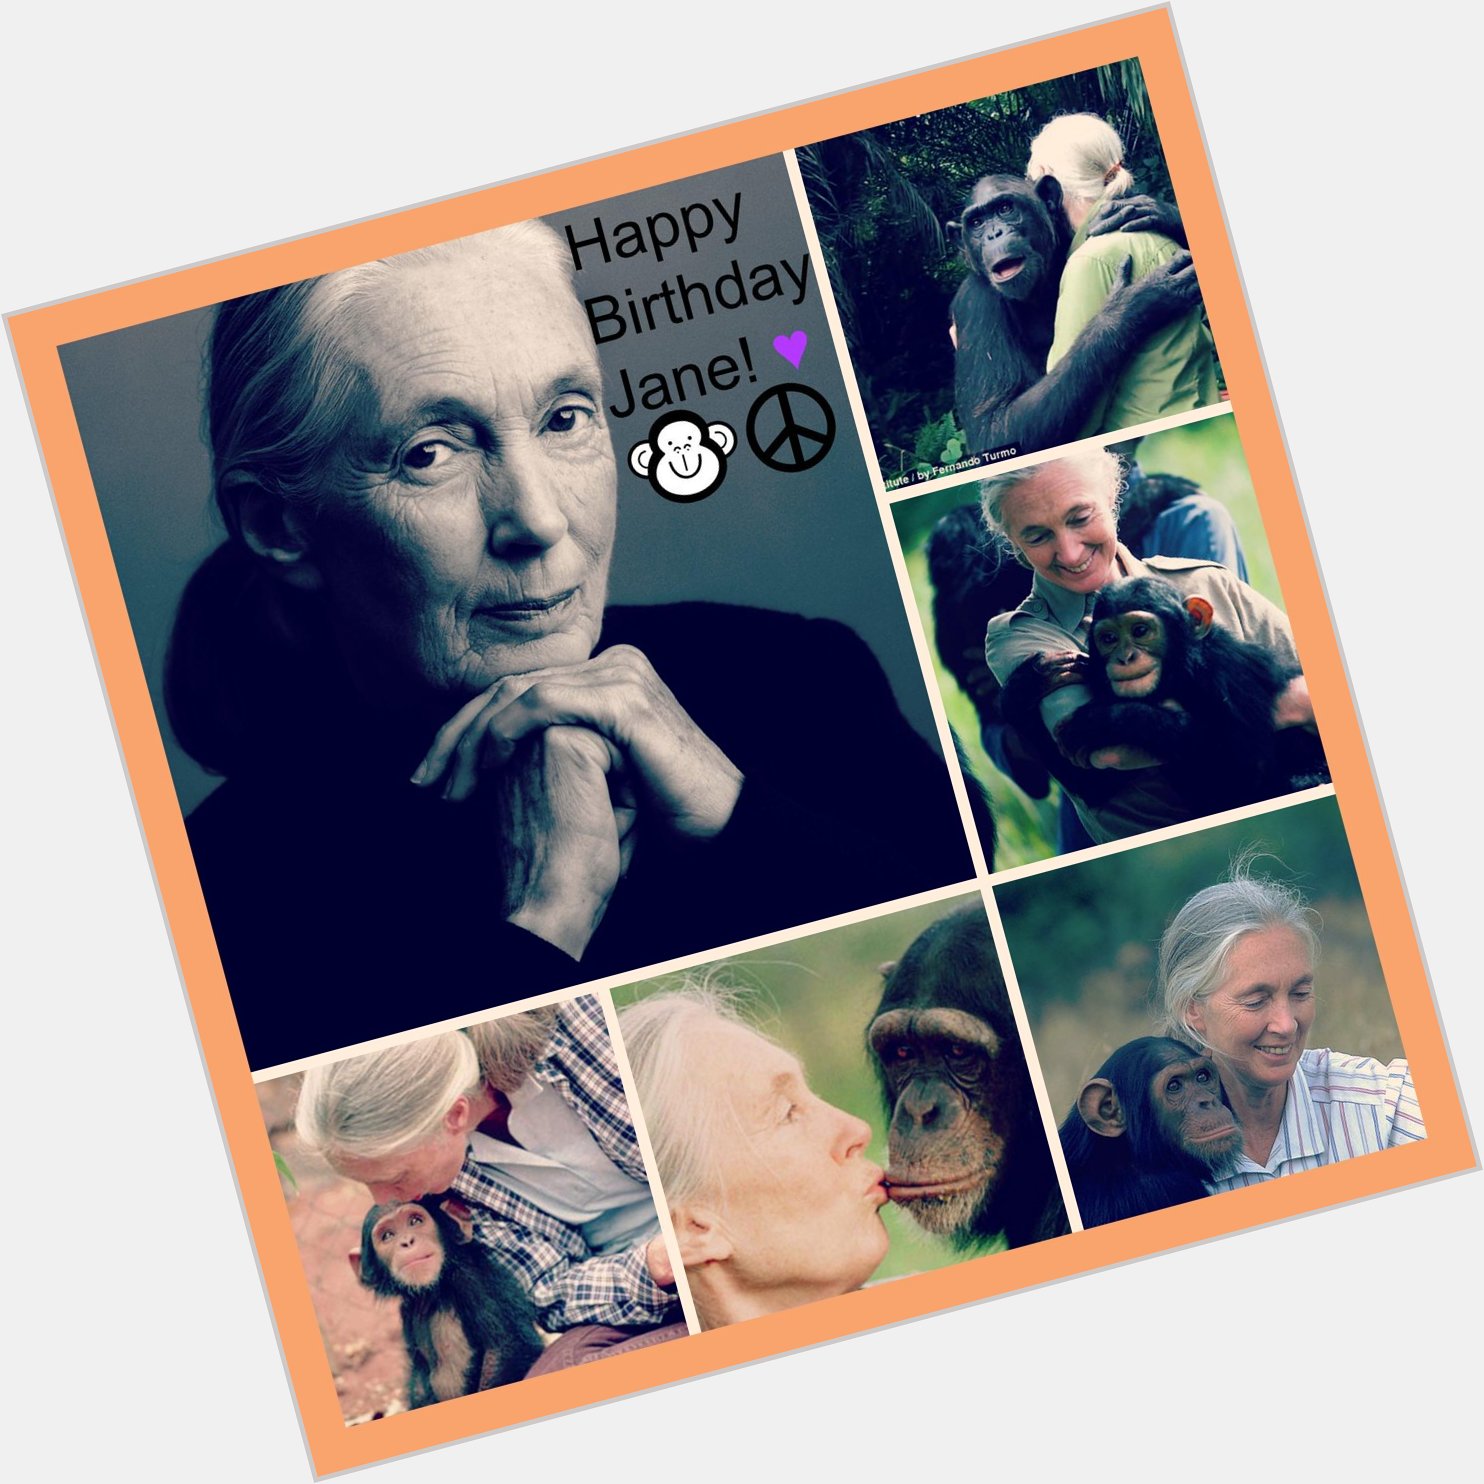 A very happy Birthday to Jane Goodall, thank you so much for what you do for animals!   